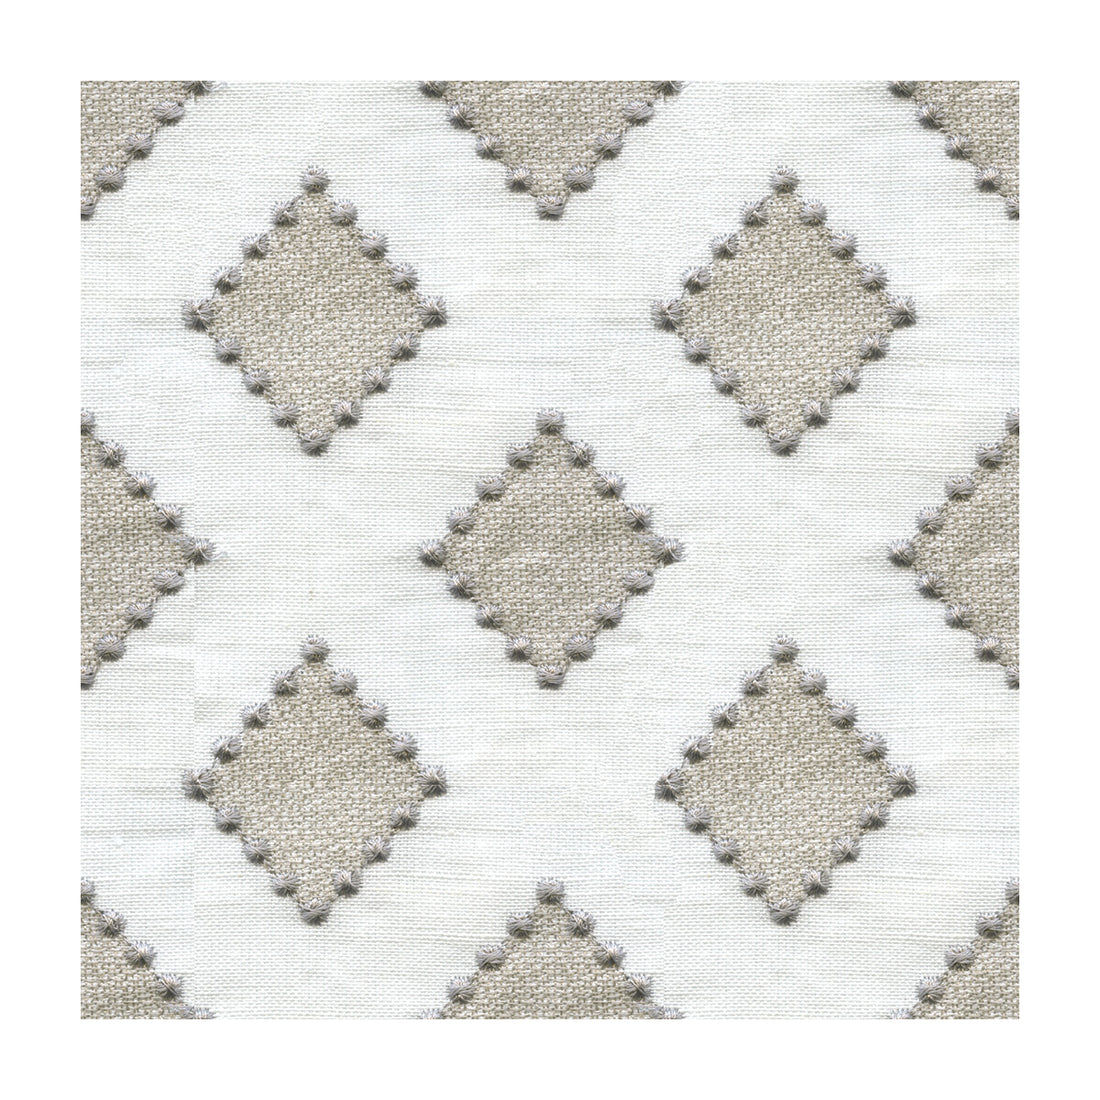 Diamondots fabric in linen color - pattern 34267.1611.0 - by Kravet Basics in the Sarah Richardson Harmony collection